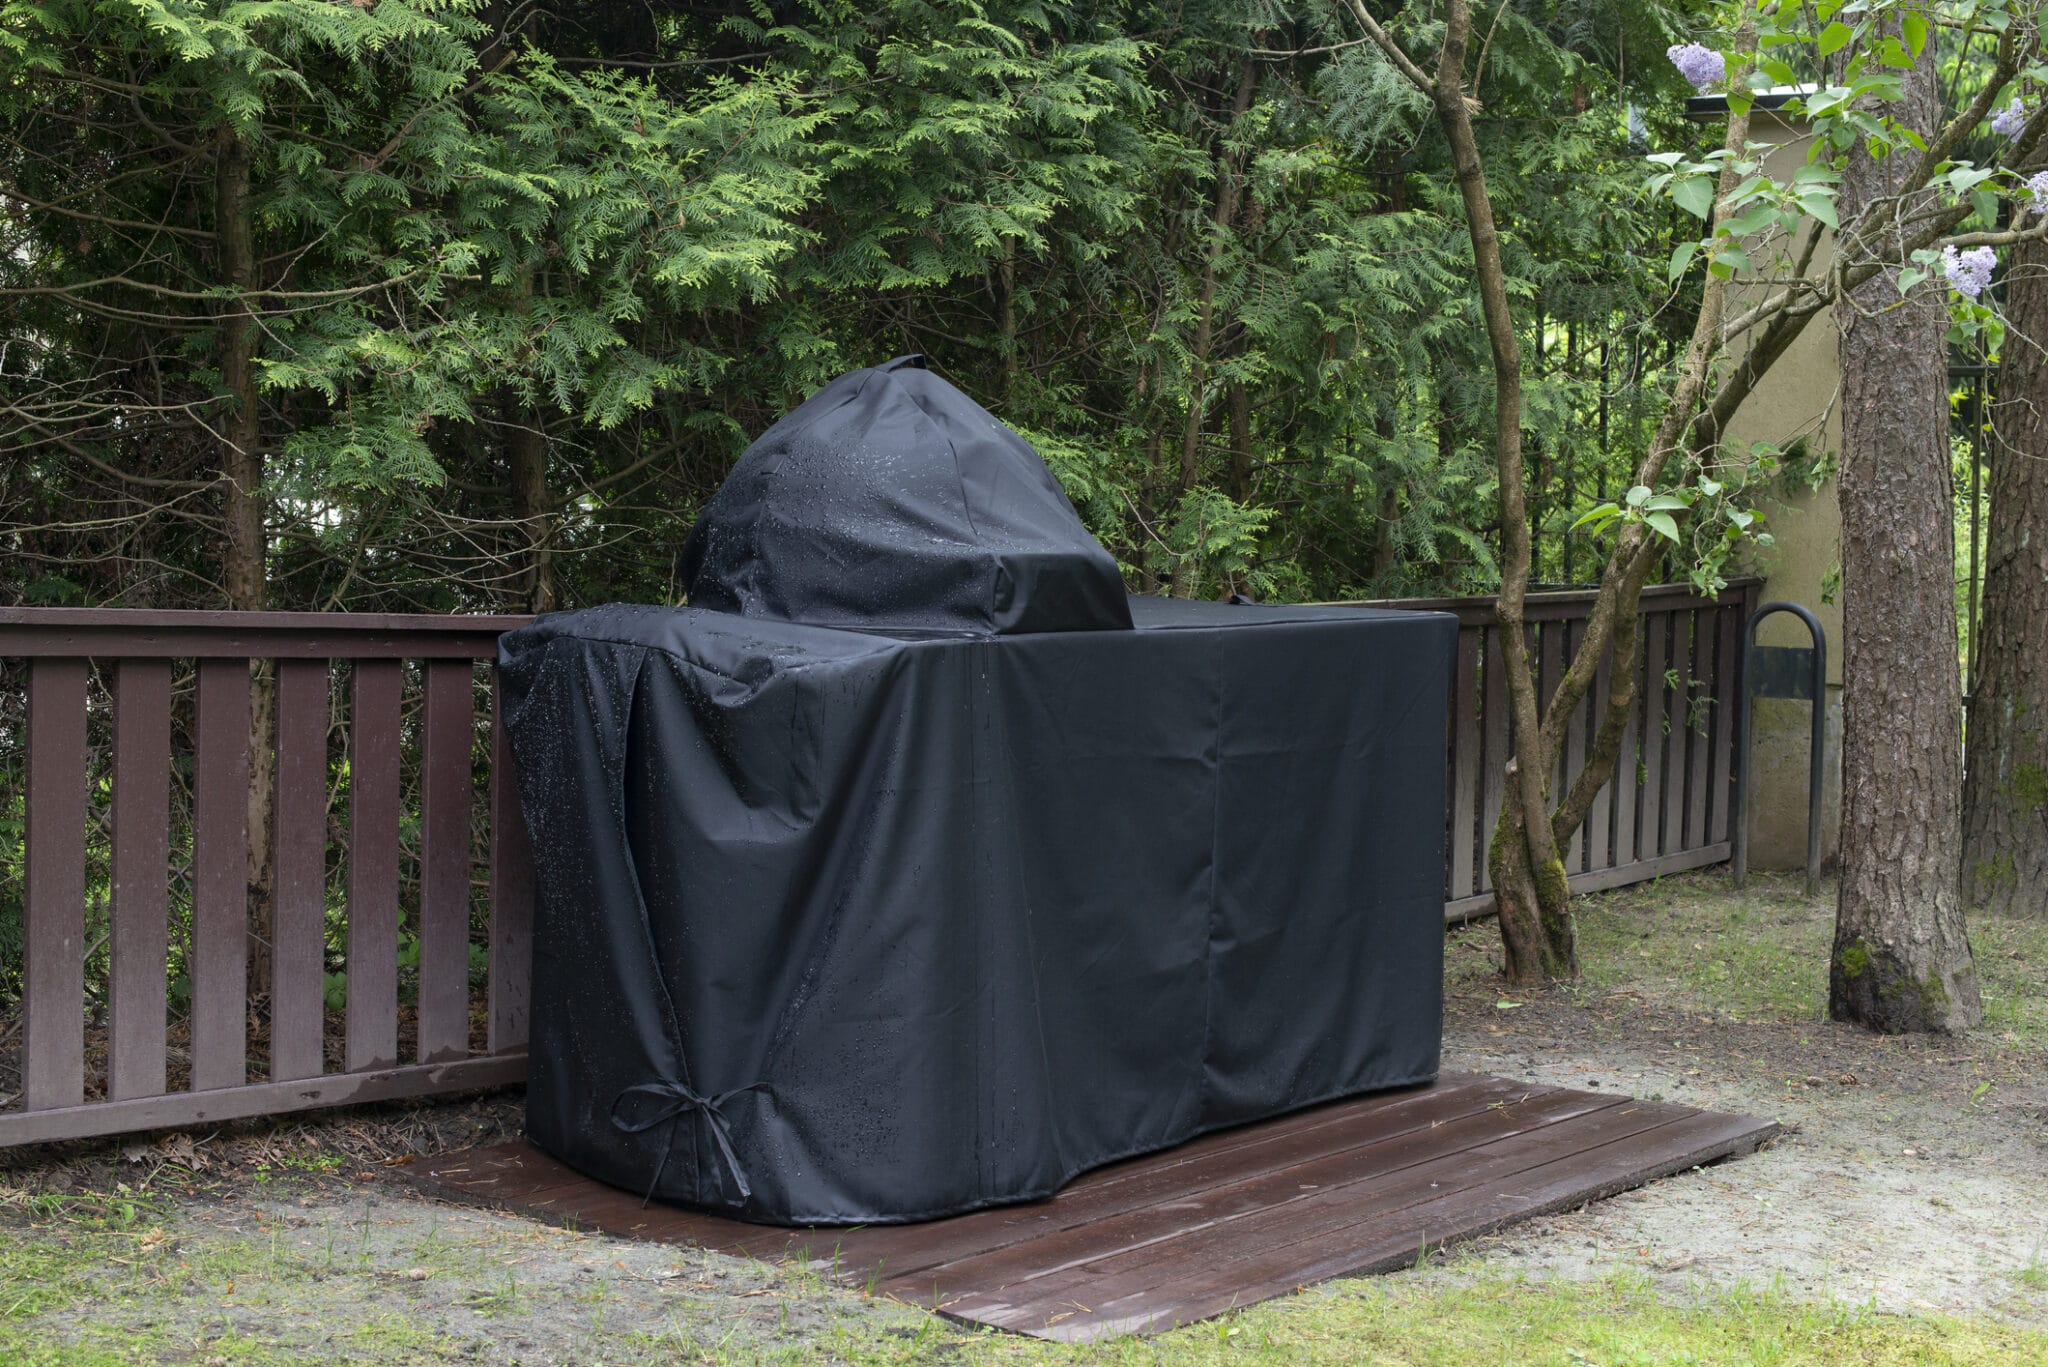 Barbecue grill Cover protecting kamado style ceramic grill from rain.